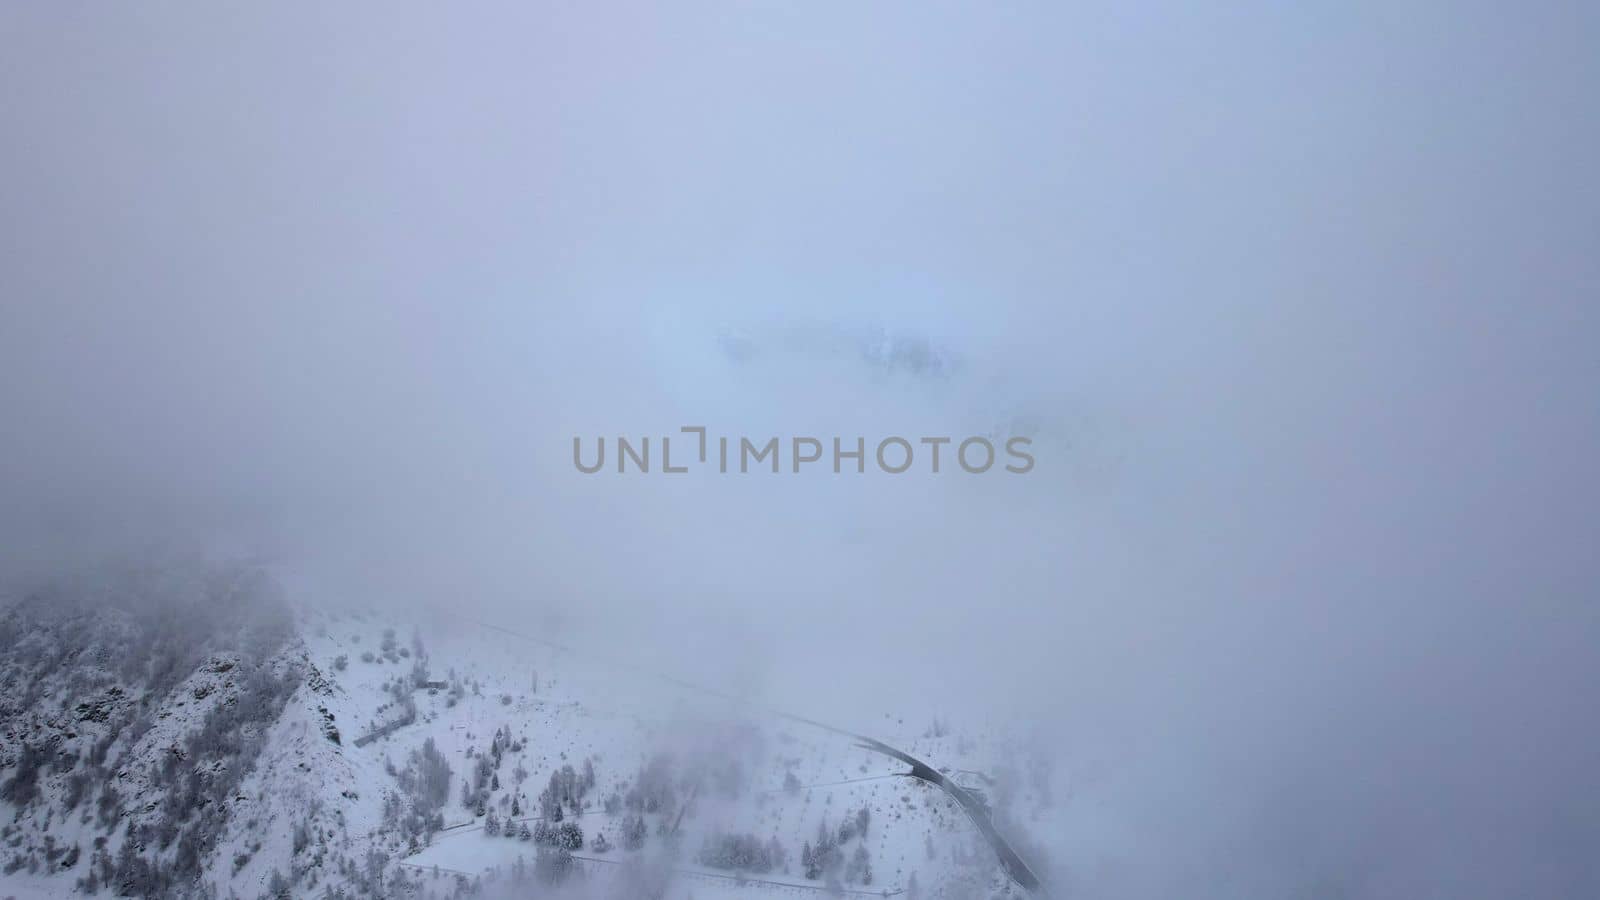 Snowy mountains with coniferous trees in clouds by Passcal